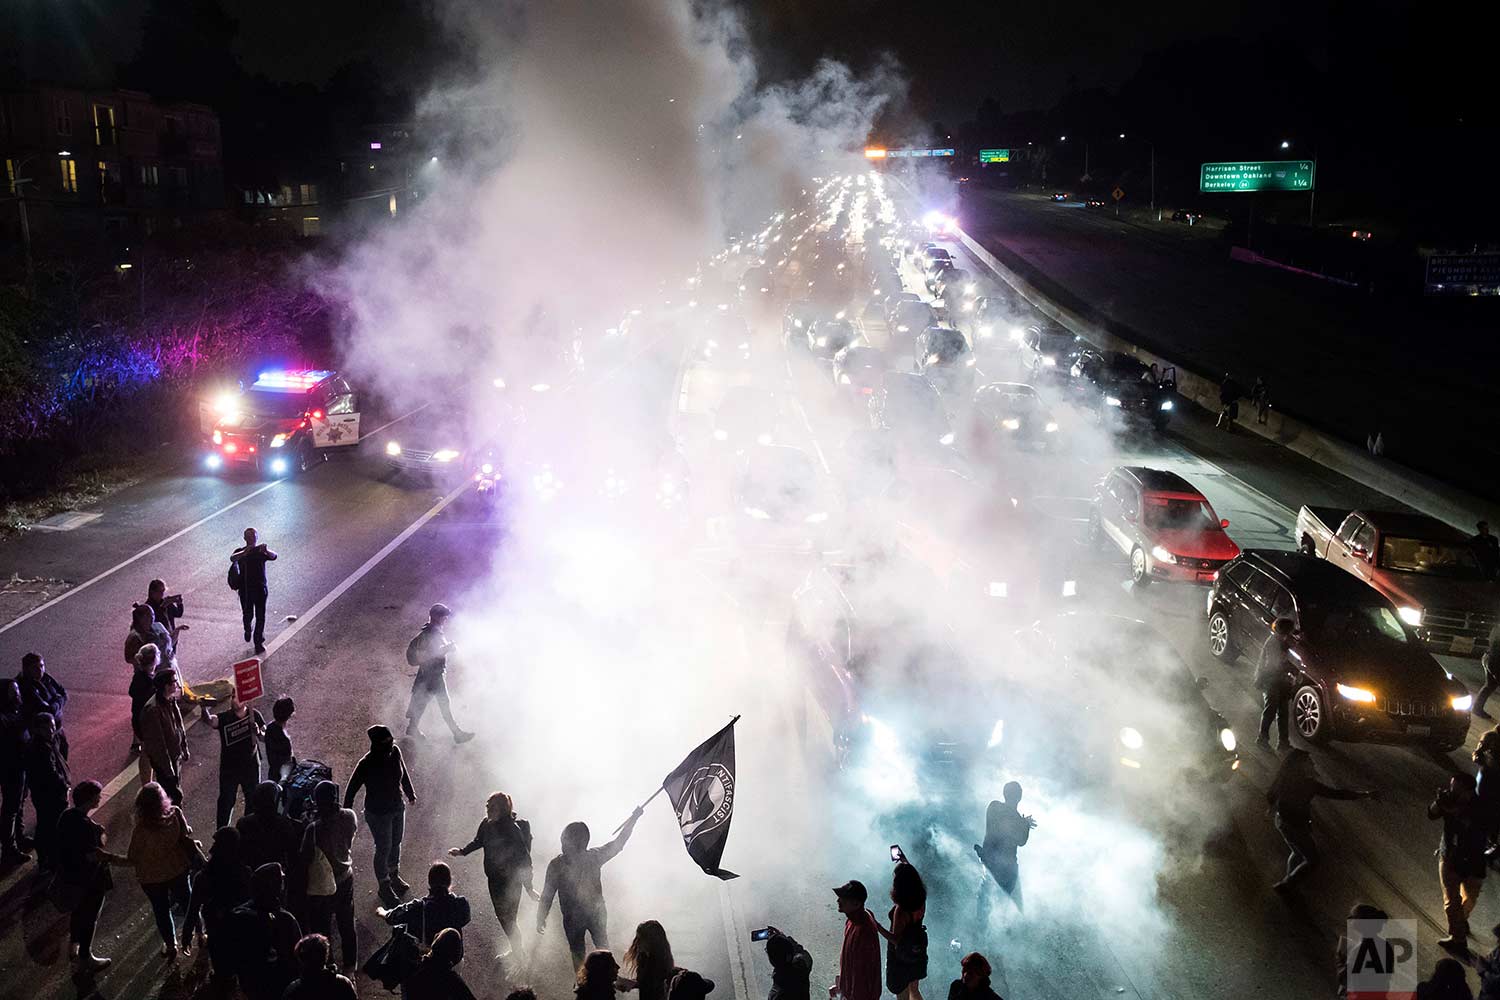  Protesters against racism block traffic for both directions of Interstate 580 in Oakland, Calif., Saturday, Aug. 12, 2017. (AP Photo/Noah Berger) 